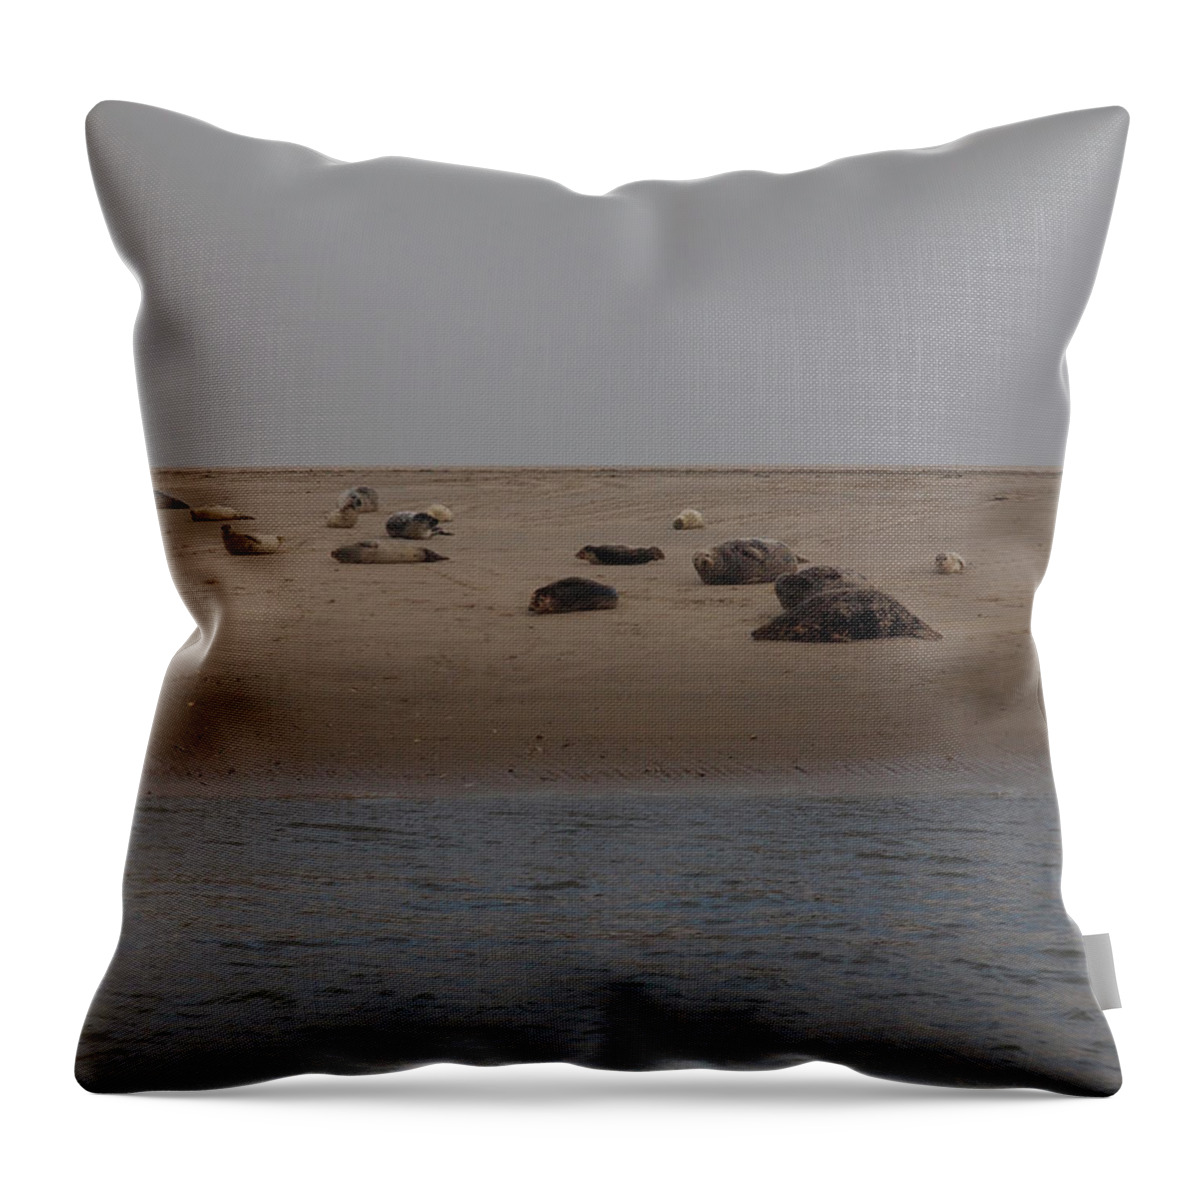 Ip_10312401 Throw Pillow featuring the photograph View Of Seals On Sand From Gorch Fock At Lower Saxony, Germany #1 by Jalag / Marion Beckhuser